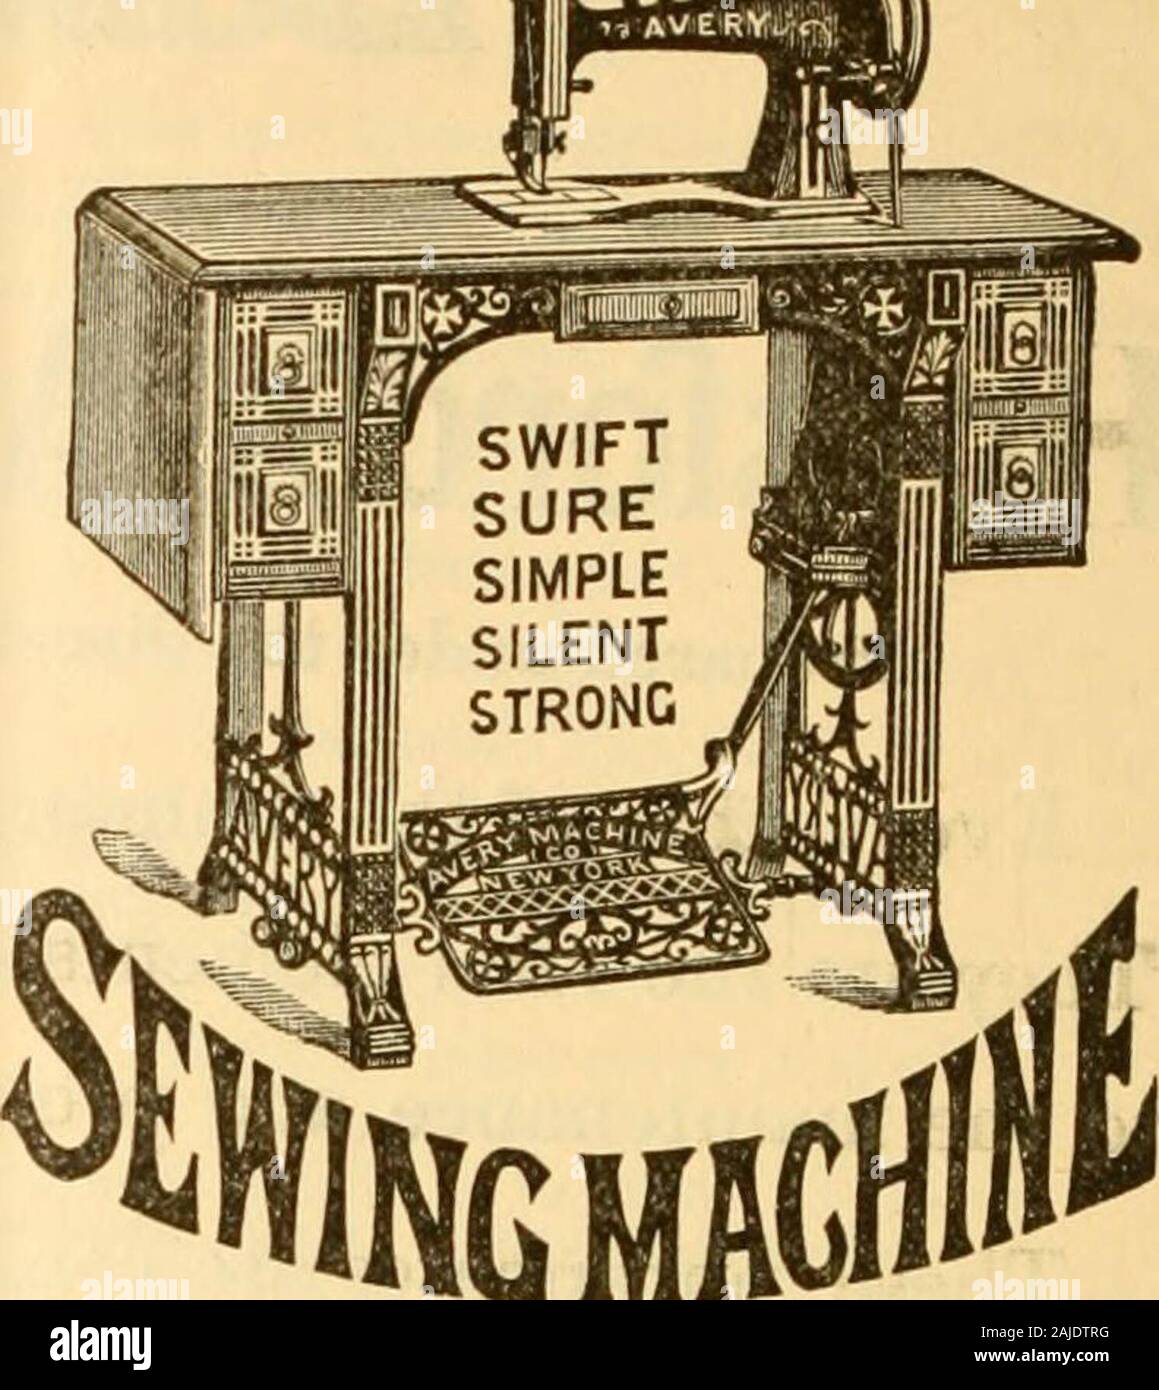 Advertising Poster, Dauntless Light Running Only Self Threading Sewing  Machine, 1870-1889 - The Henry Ford